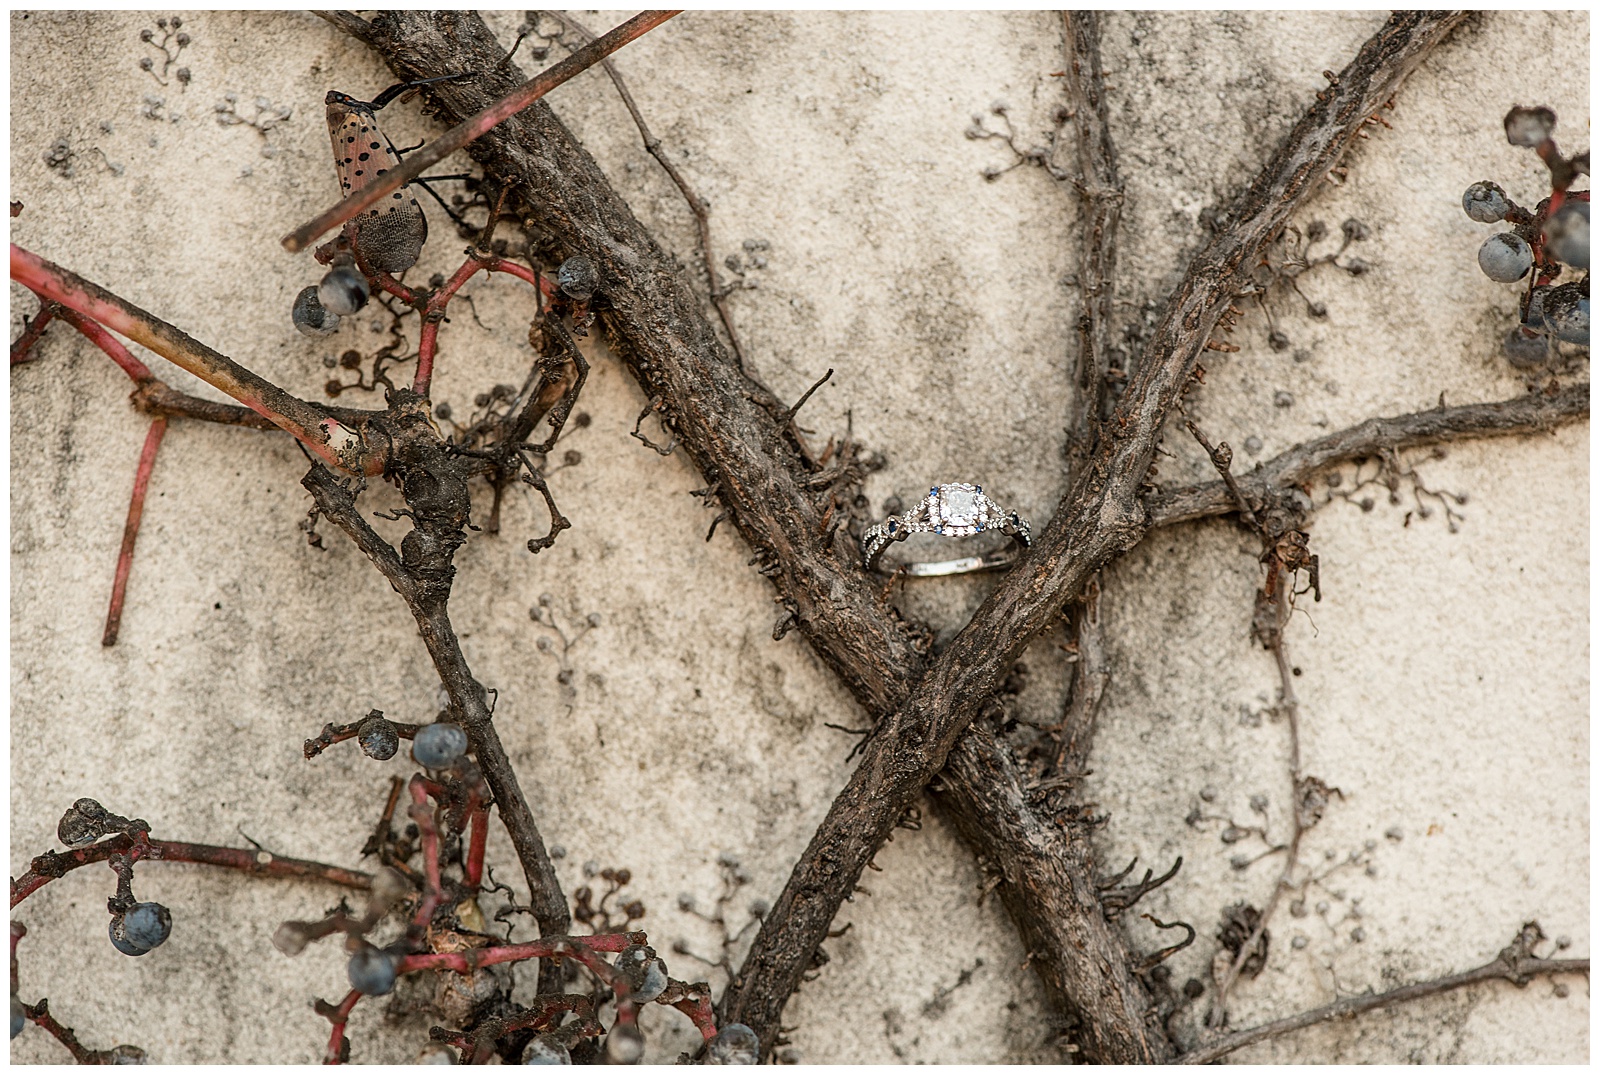 beautiful silver and diamond engagement ring resting in the criss-crossing vine branches by concrete wall at longwood gardens